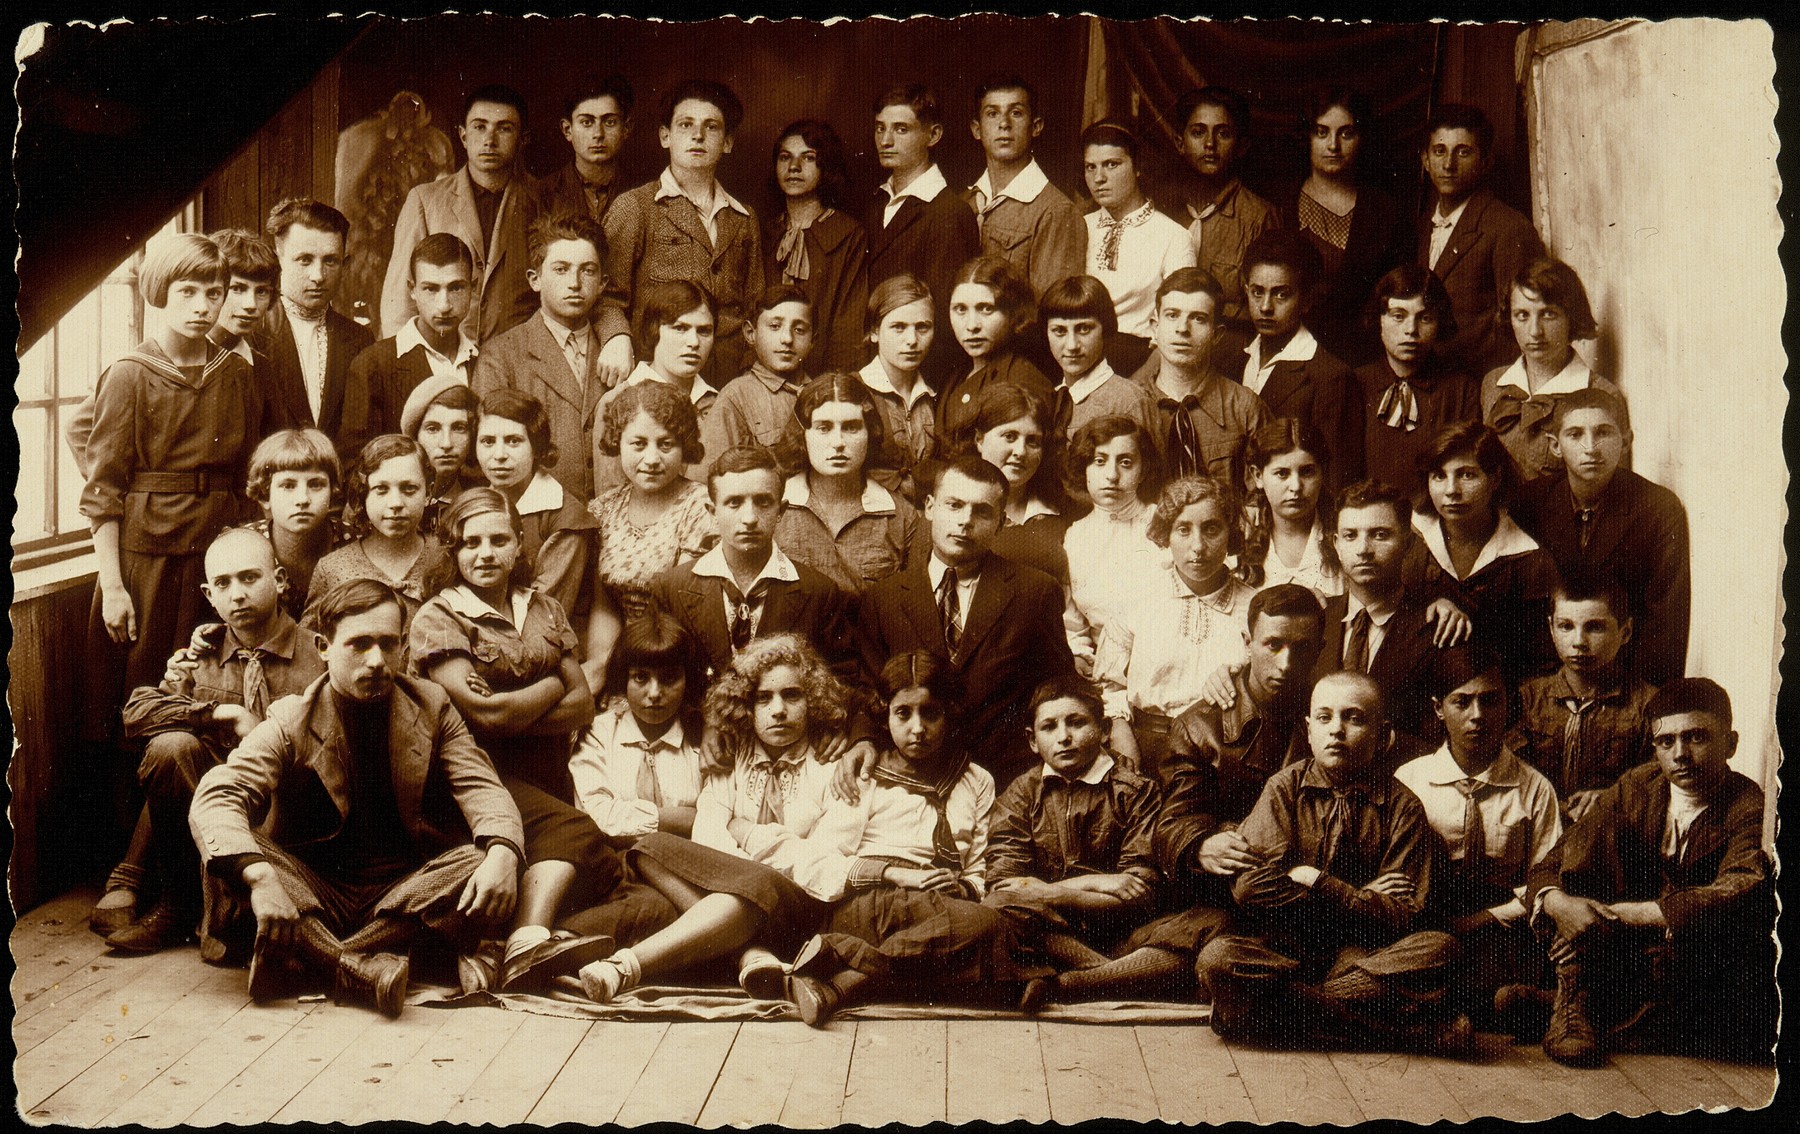 A special meeting of Hashomer Hatzair in Eisiskes attended by counselors from Vilna, including Abba Kovner.  

Among those pictured are: top row, from right to left: Boyarski, Krupski, Kaplan, Bichvid, unknown, son of Aronka, Reb Yoshe the coachman's son, unknown;  second rowfrom the top:  Michalowski, Boyarski, Krupski, Bichvid, Cofnas, Portnoy, Borshanski, Levitan (first names are unknown); third row from the top: Herzl, Miriam Lewinson, Lebovitz, Ginunski; fourth row from the top: Garmenishki, Rosenblum, Shalom Kahn, Reuven Paikowski.  Sitting on the floor are Abba Kovner (with his hand on the boy in front of him), Manosh Blacharowicz, and Stoller (the girl in the center with blond curly hair).  

Only 11 of those pictured survived the Holocaust, among them Abba Kovner and Reuven Paikowski.